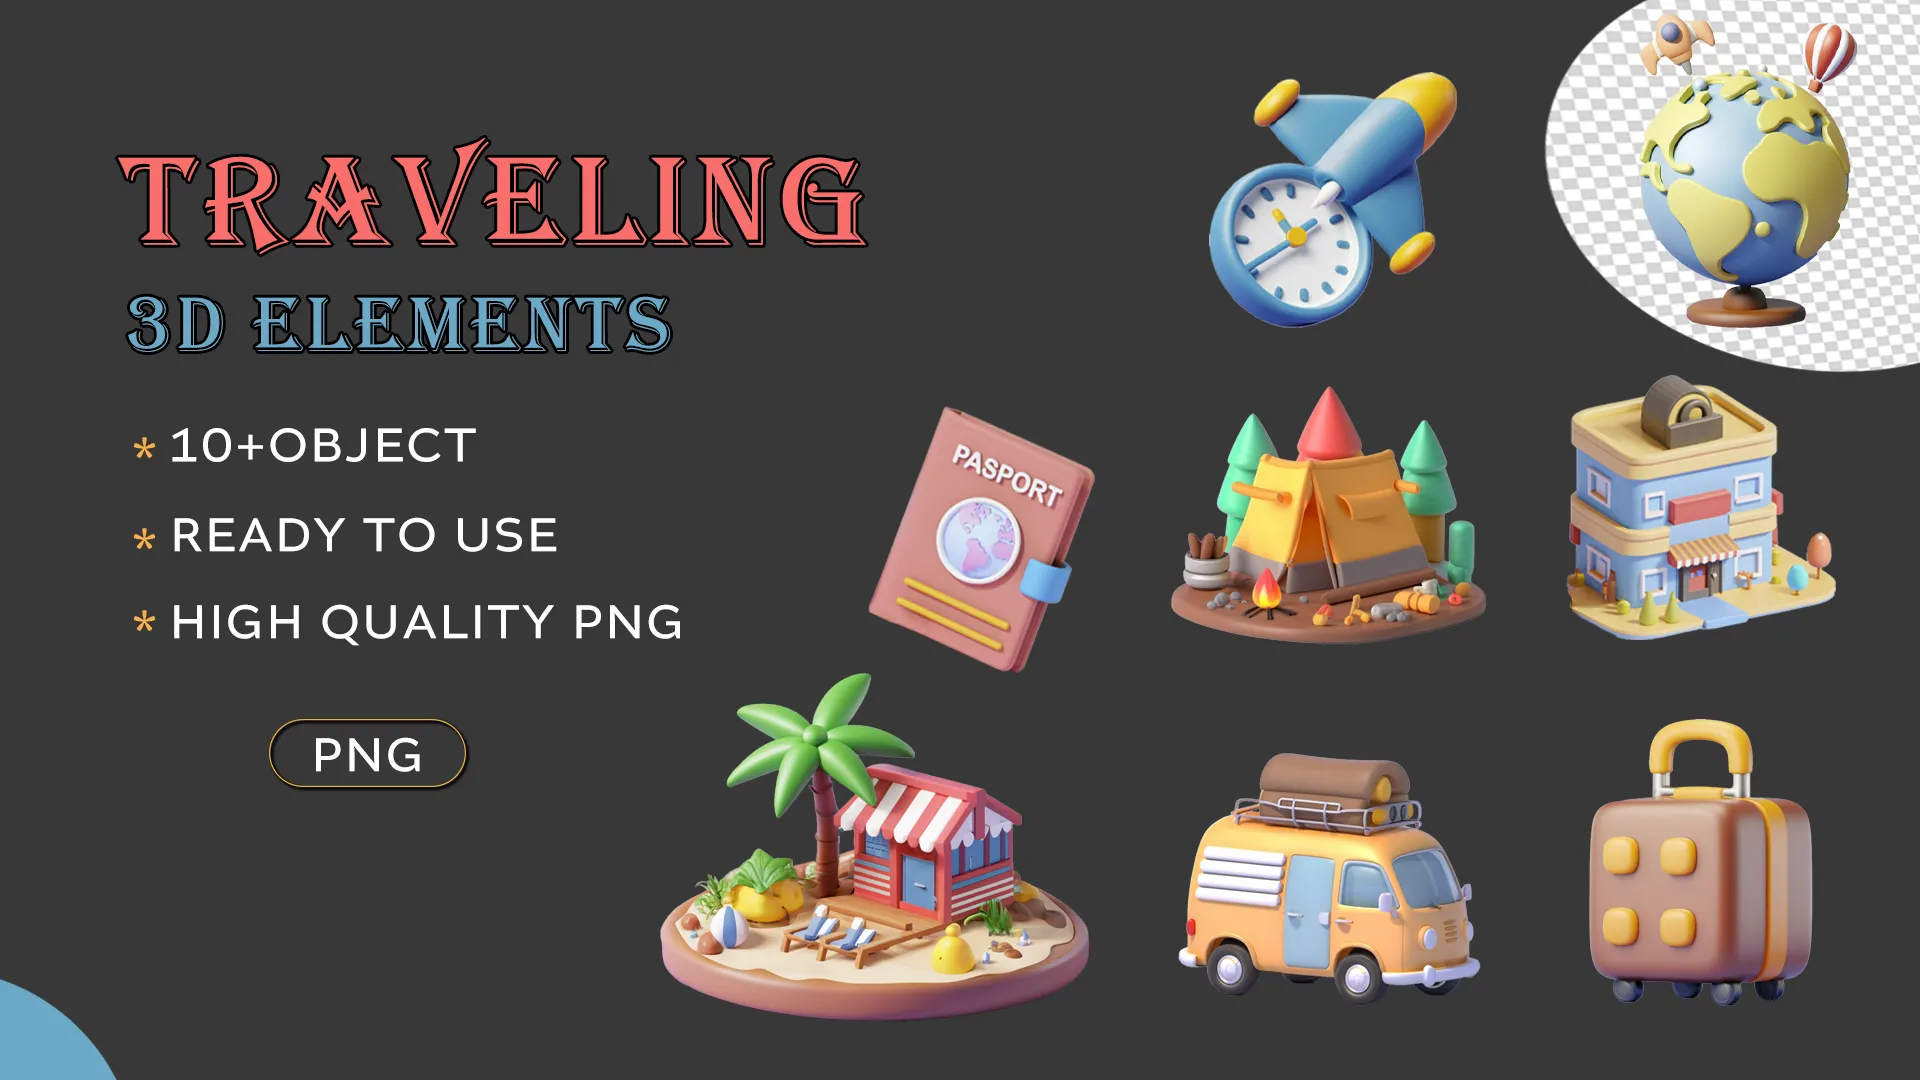 Global Adventure 3D Travel Object Pack image